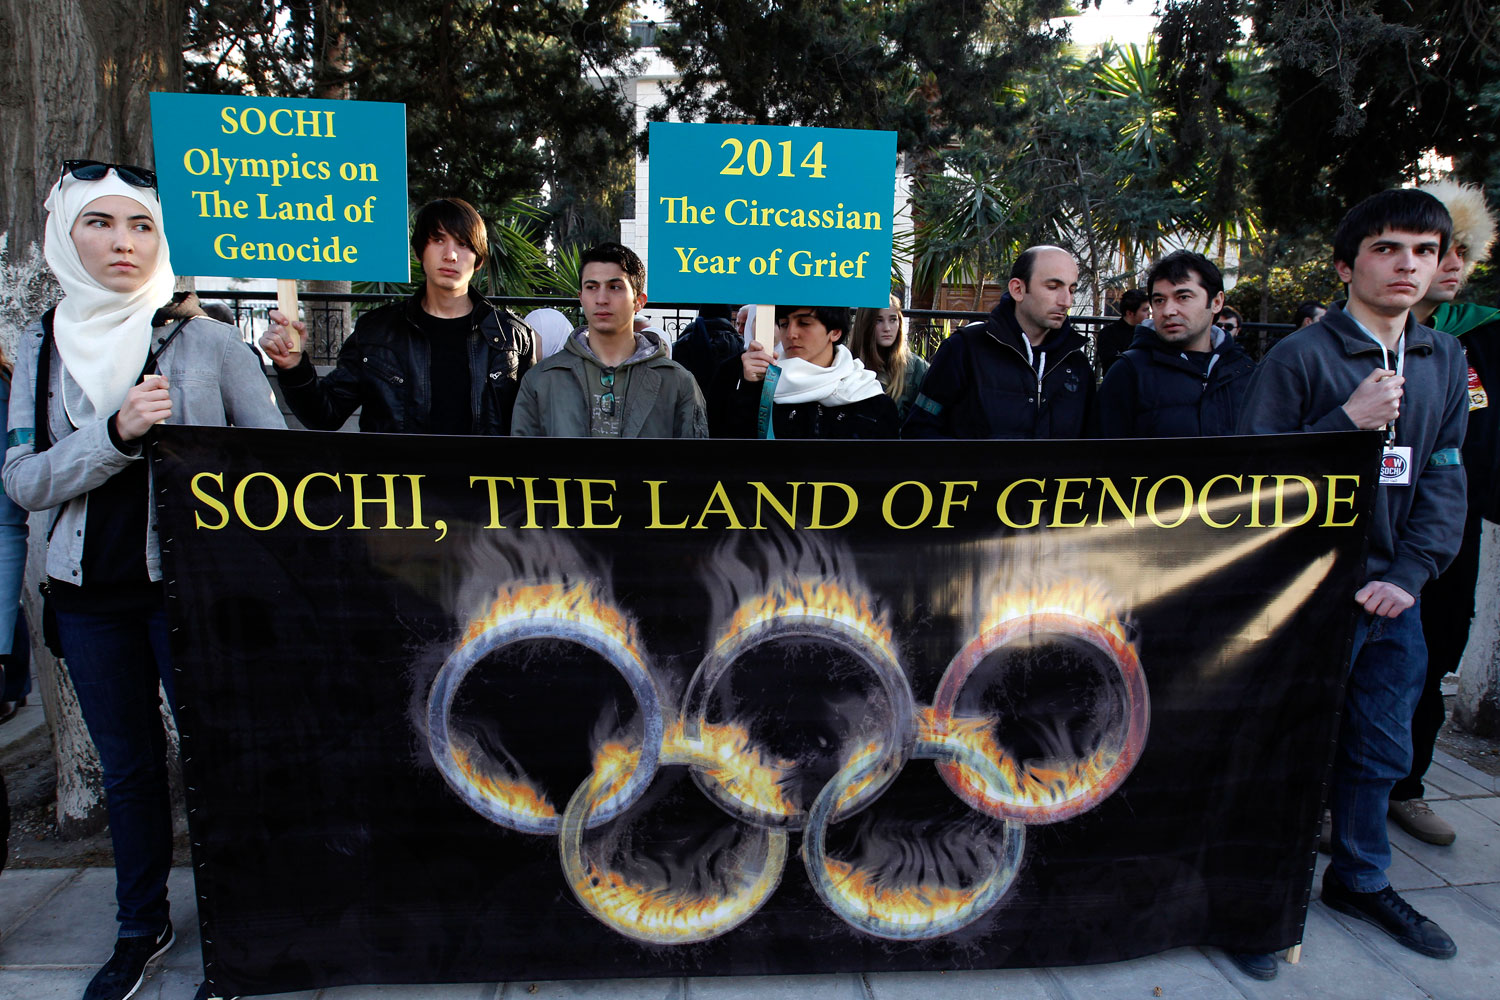 The Sochi Games Are Being Held on the Land of Genocide